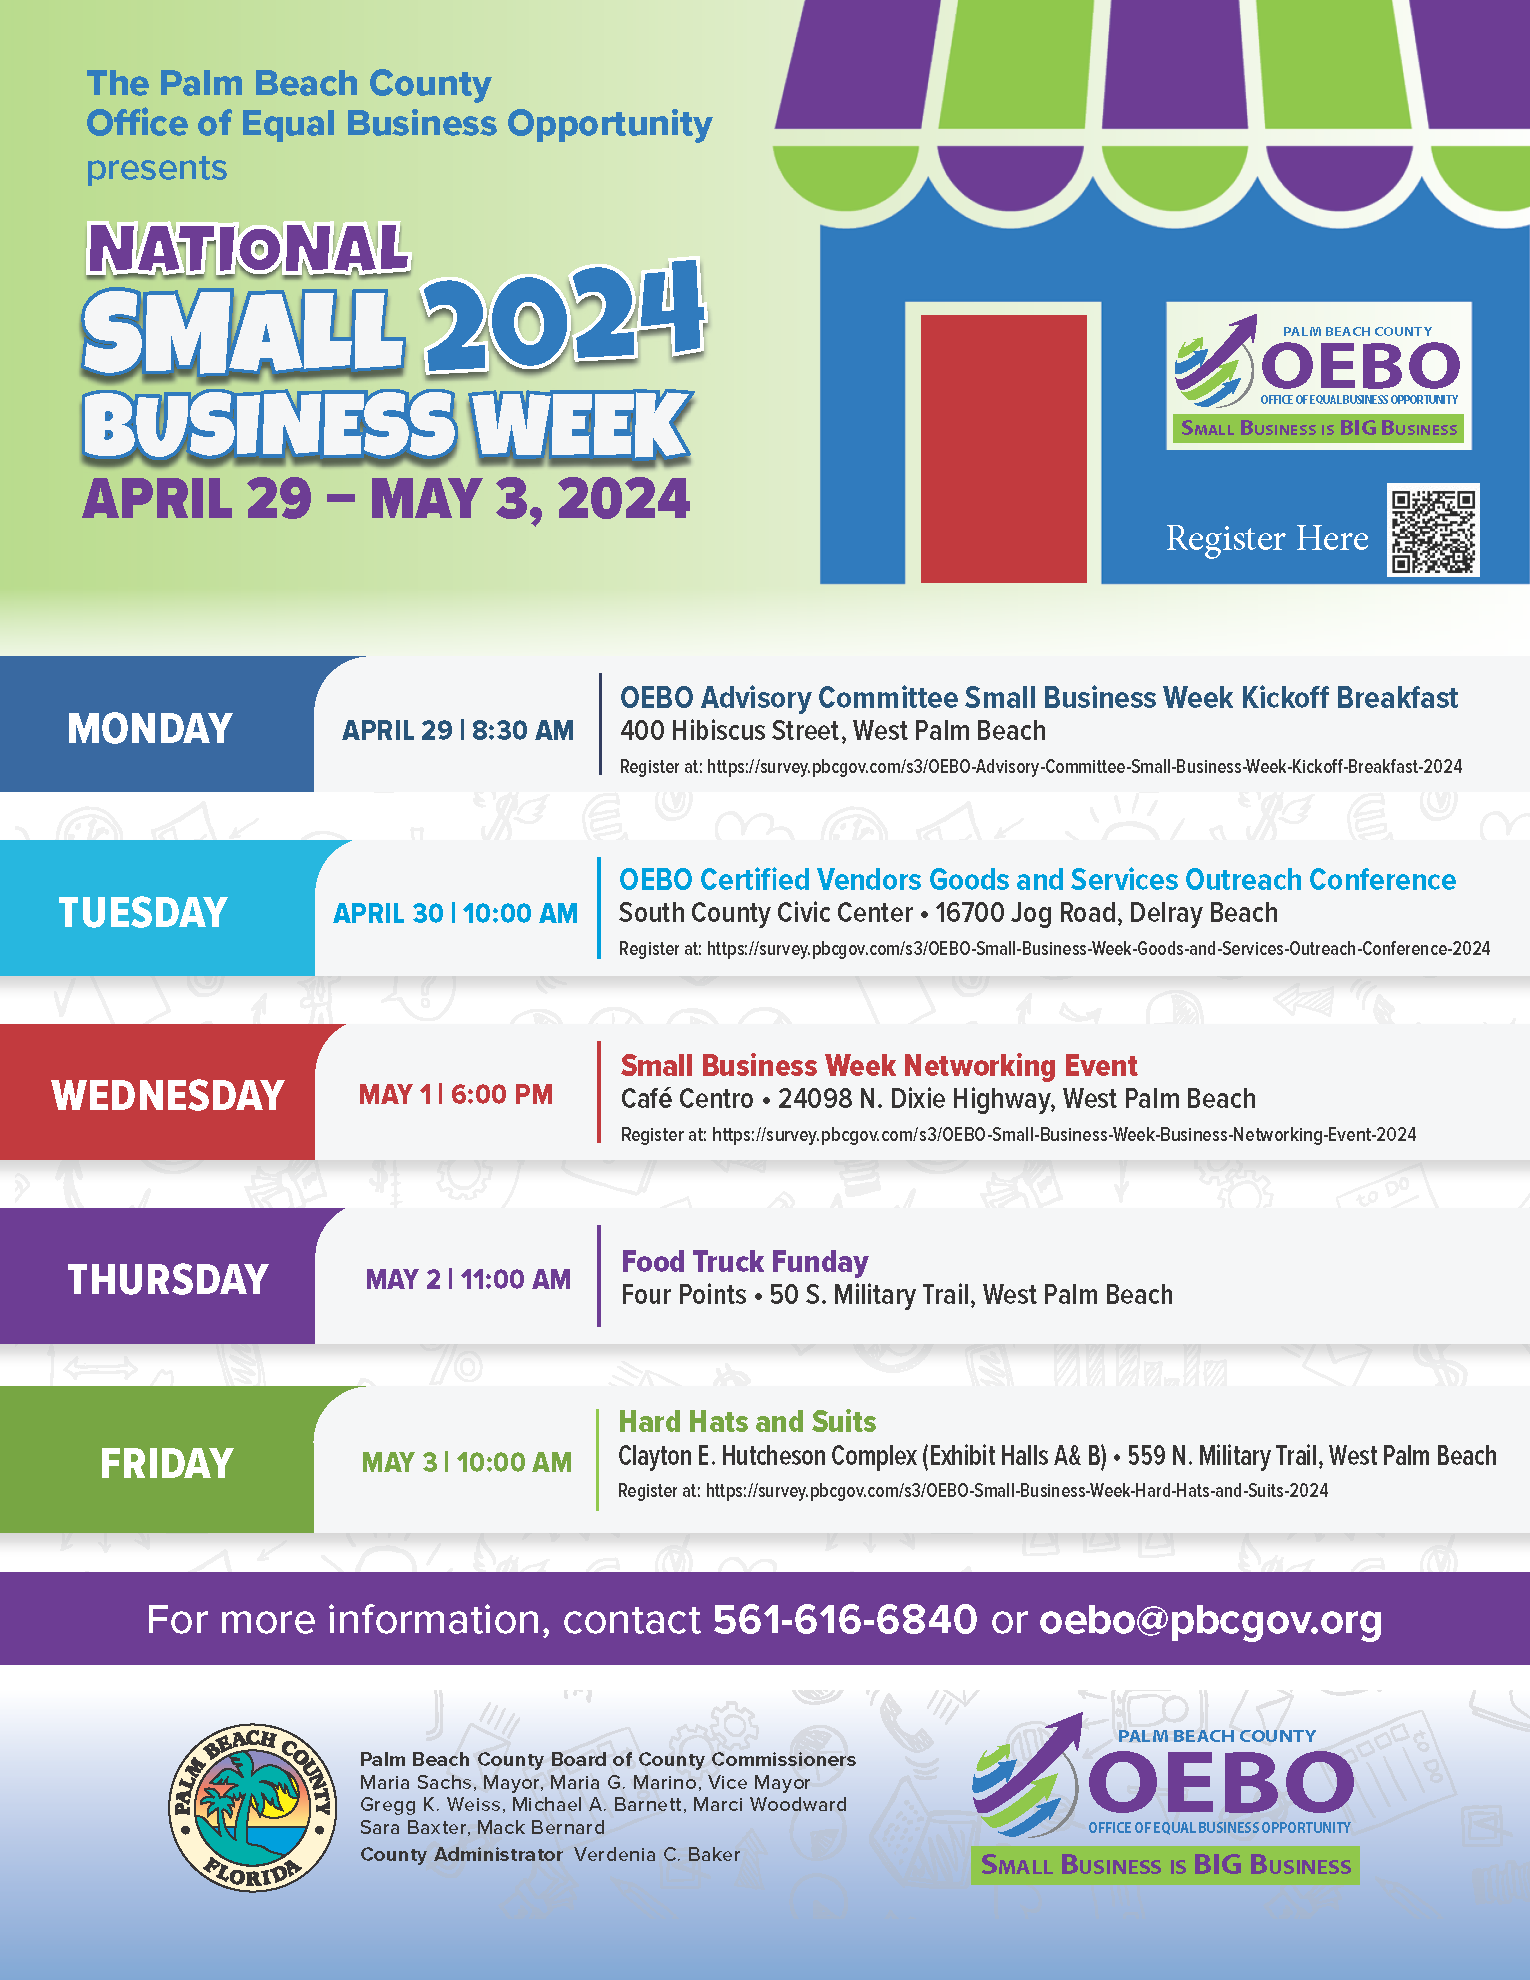 Small Business Week Flyer 2024, details are available in text on this page